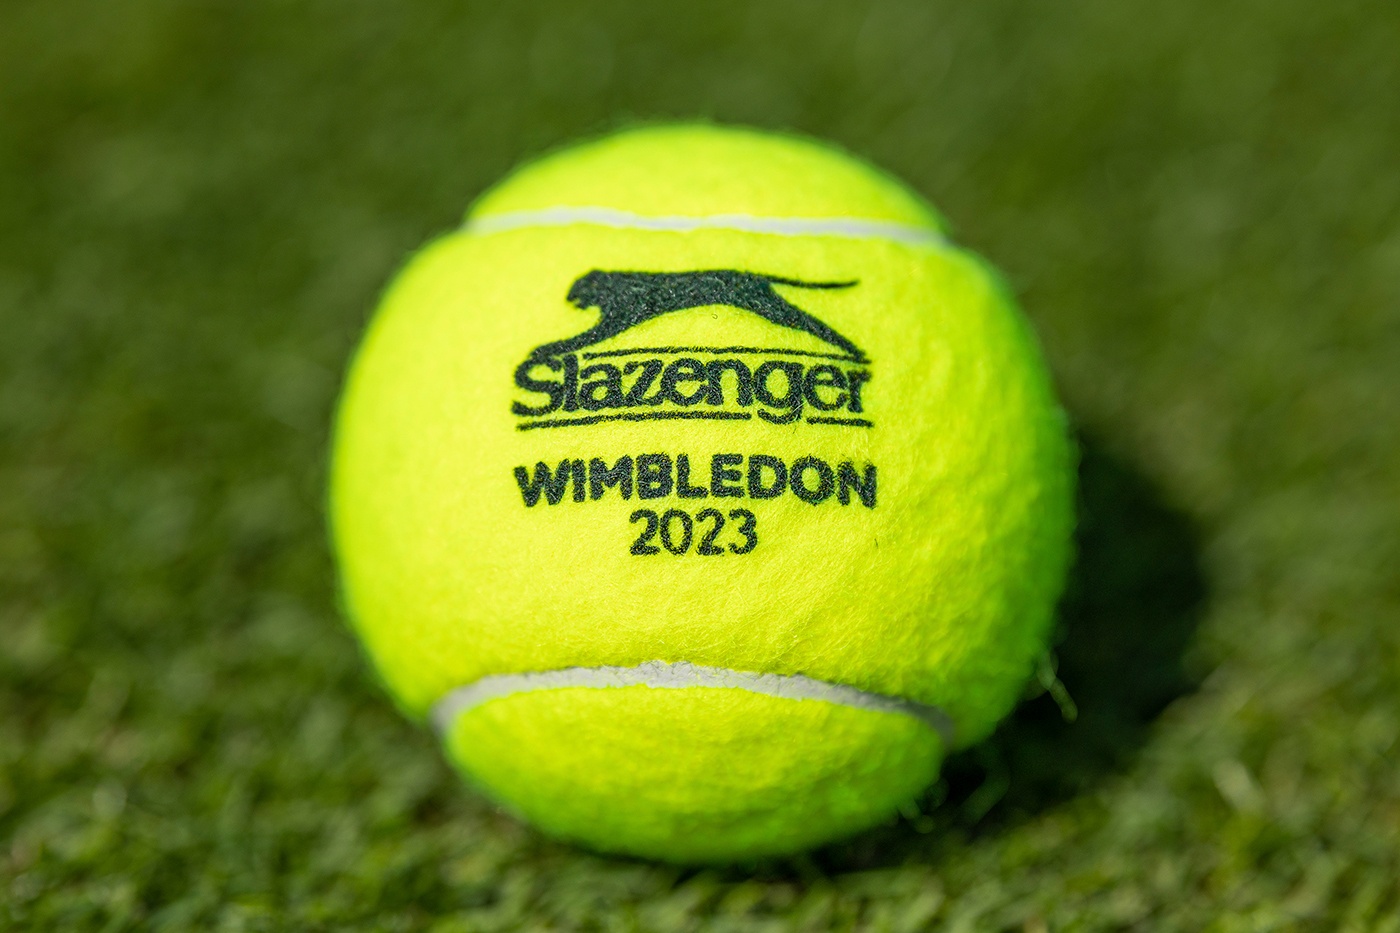 BARCLAYS IS SERVING AN ACE AT WIMBLEDON THIS SUMMER